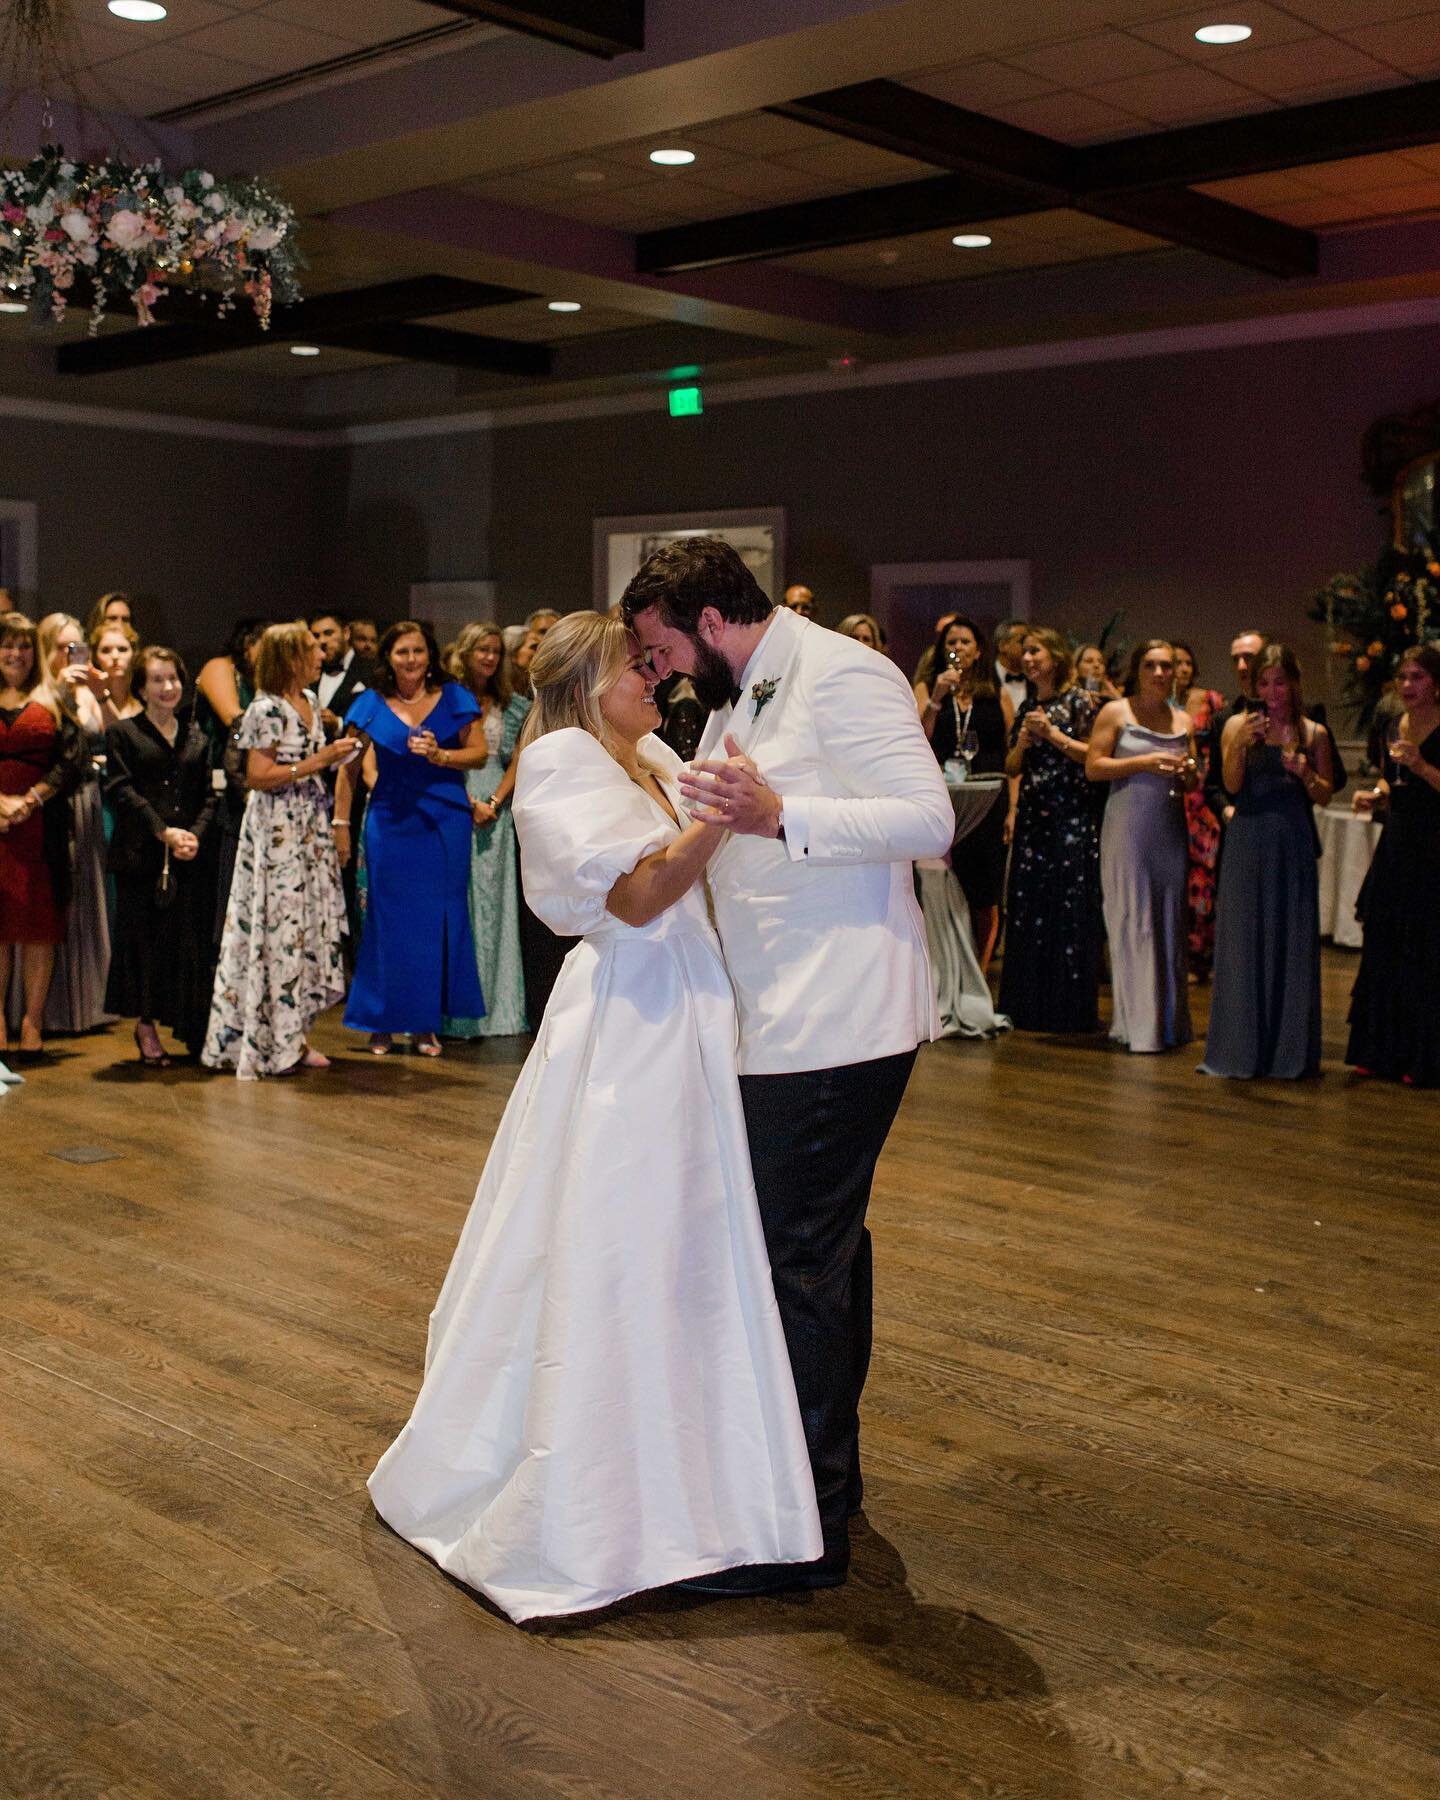 Ellinor &amp; Alec were 🤴🏻&amp;👸🏼 at finding special moments to connect throughout their dance ✨

📸 @jaydeephotos_

#wedding&nbsp;#firstdance&nbsp;#weddingdance&nbsp;#dancelessons&nbsp;#weddingdancelessons&nbsp;#weddingfirstdance&nbsp;#firstdanc